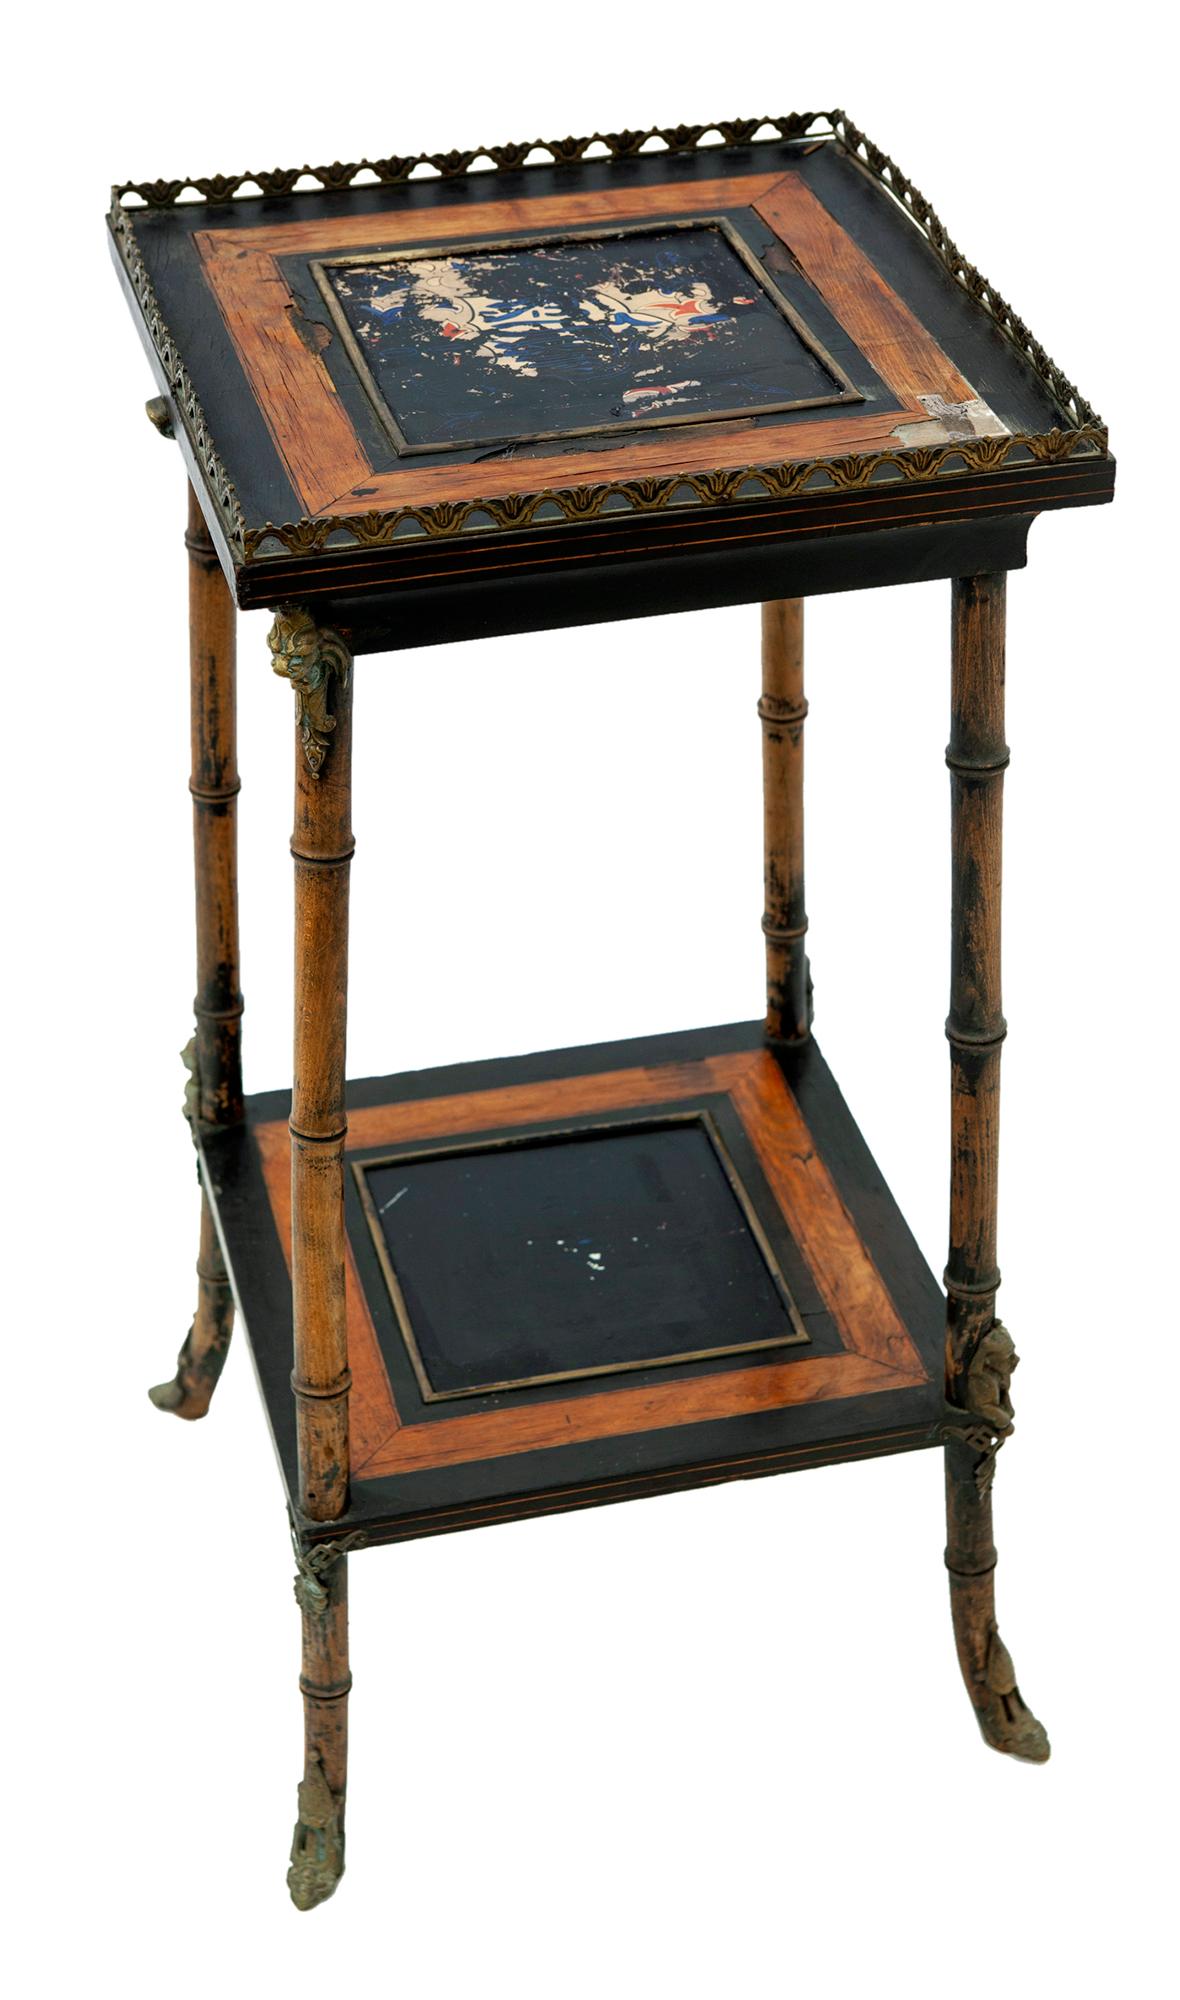 This stand has faux bamboo legs, a funky painted tile with Arabic writing lies below a black painted tile.
There is a lower shelf.
The bronze/brass ormolu features eagle and intricate pieces on each corner.
There is a slight wiggle to the piece.
For